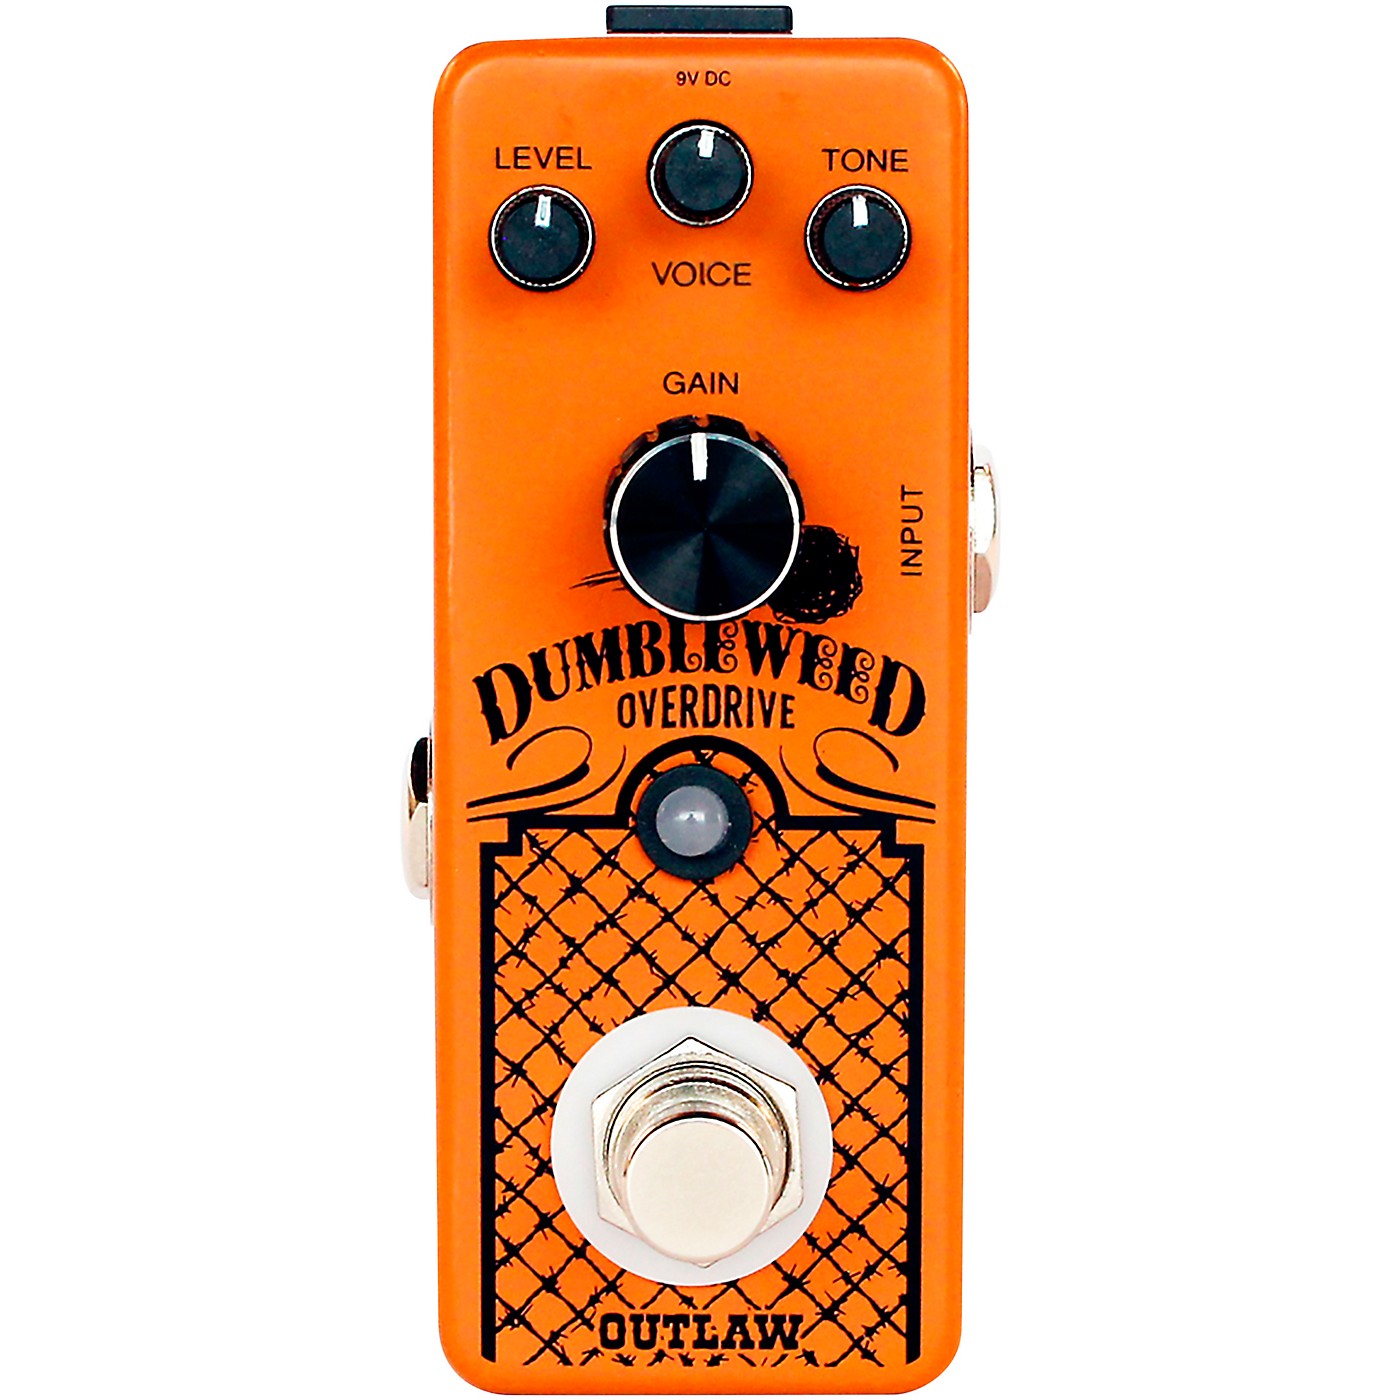 Outlaw Effects Dumbleweed Overdrive Effects Pedal thumbnail